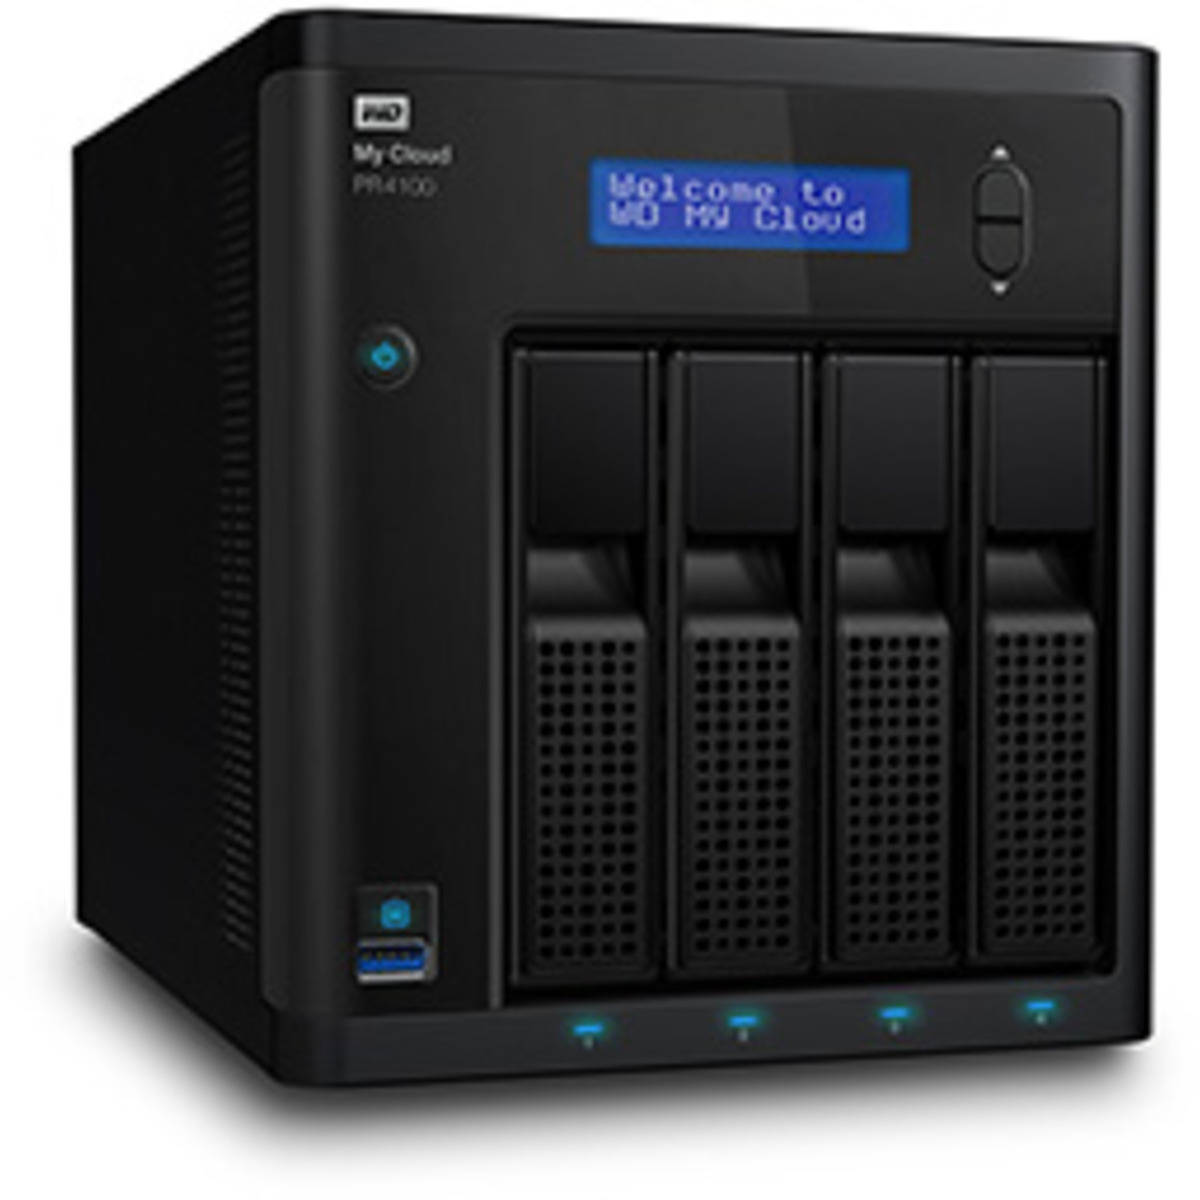 Western Digital My Cloud Pro PR4100 24tb 4-Bay Desktop Multimedia / Power User / Business NAS - Network Attached Storage Device 4x6tb Western Digital Red Plus WD60EFPX 3.5 5640rpm SATA 6Gb/s HDD NAS Class Drives Installed - Burn-In Tested My Cloud Pro PR4100